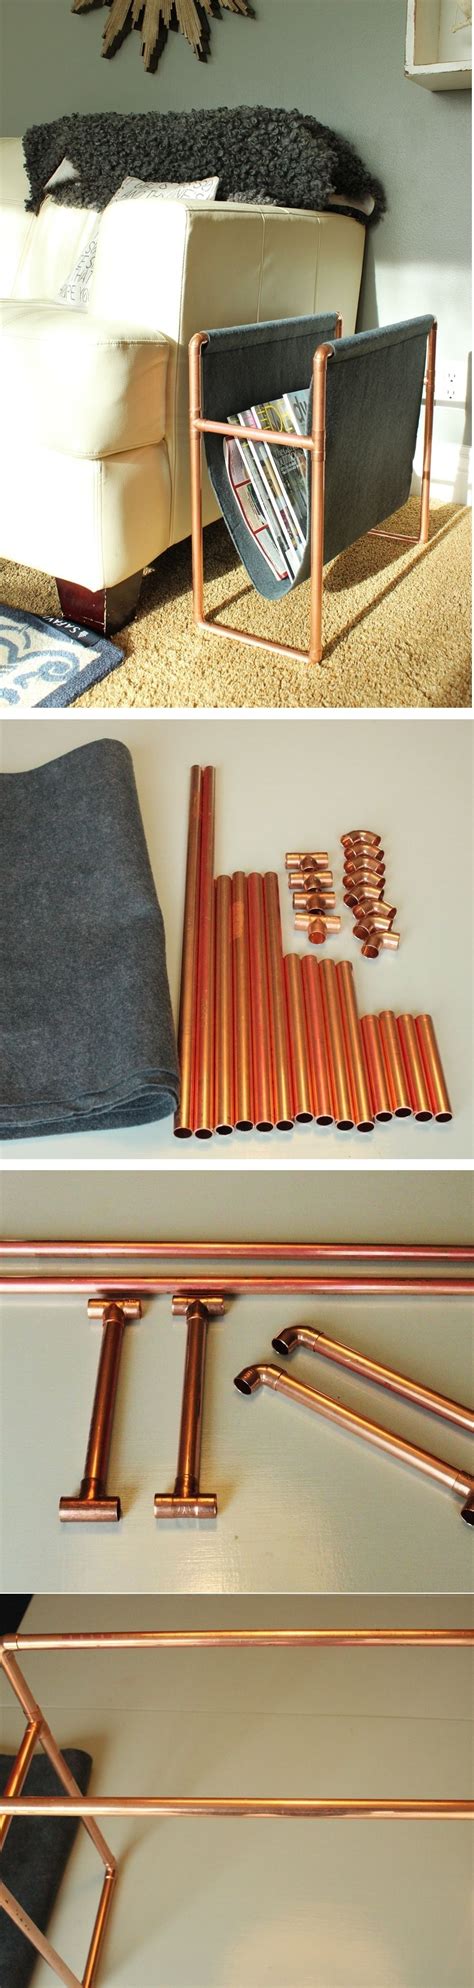 Chic Diy Copper Magazine Holder How To Make This Surprisingly Easy